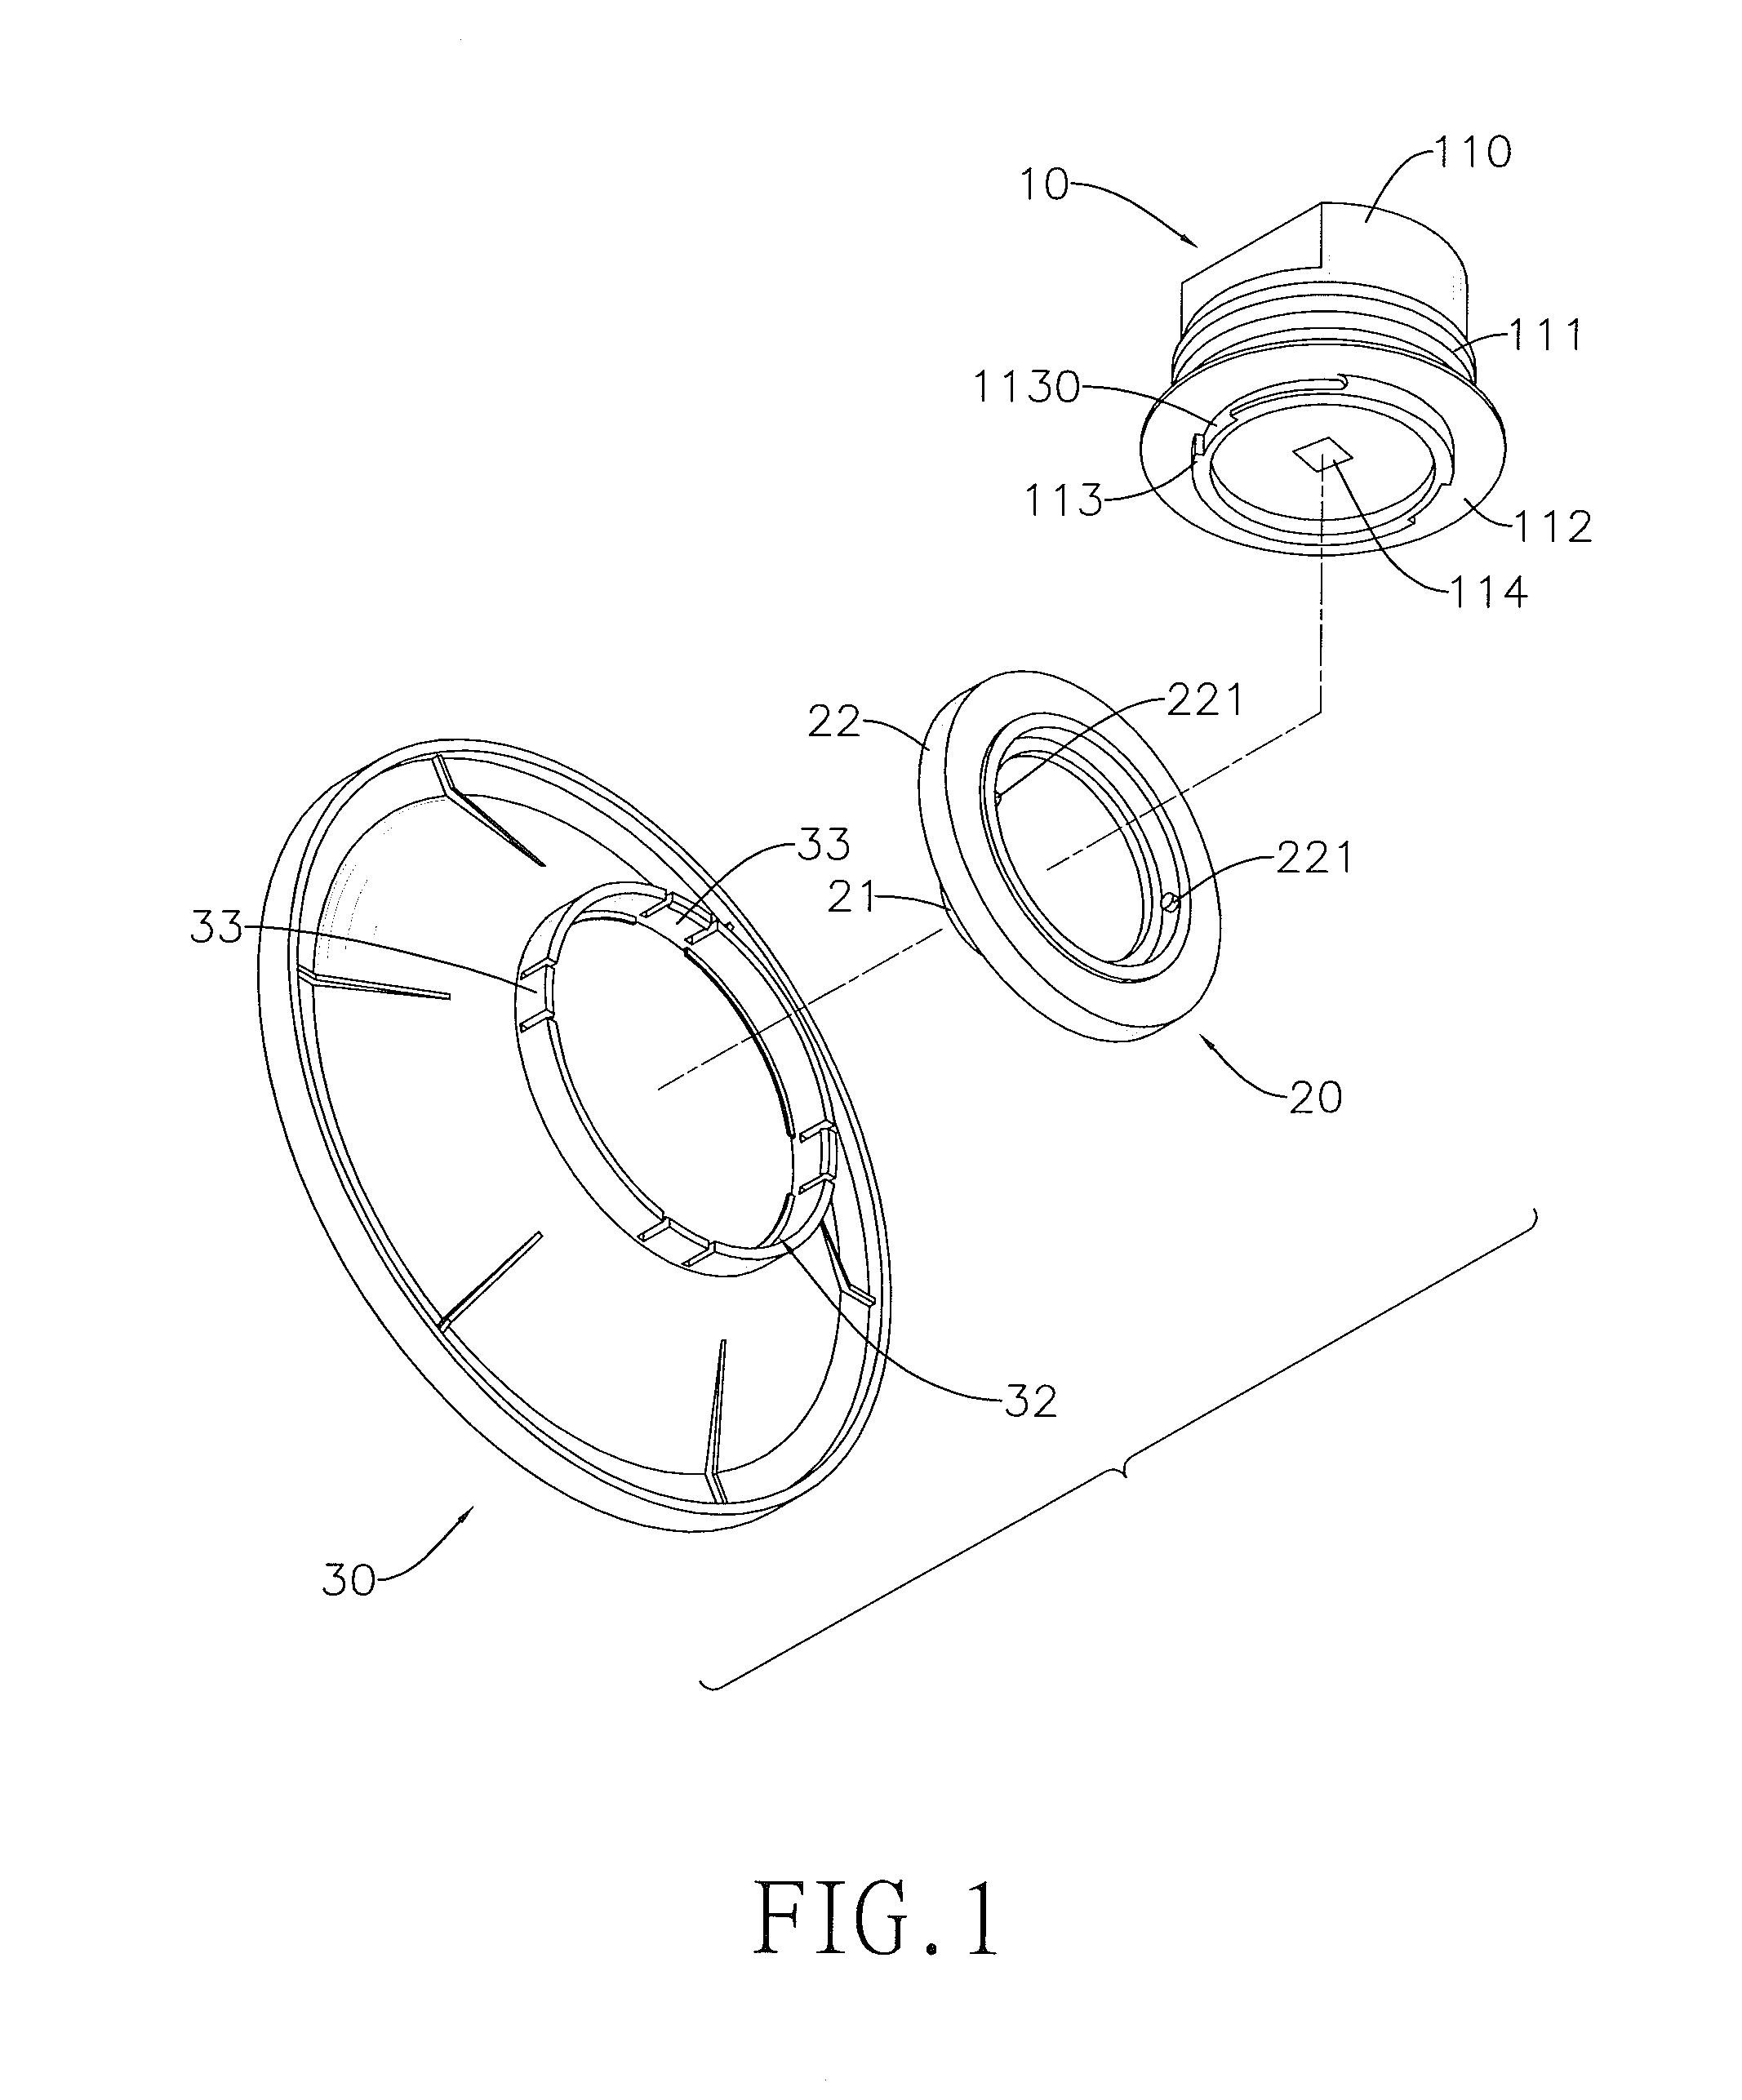 Sensing Device with a Glare Shield